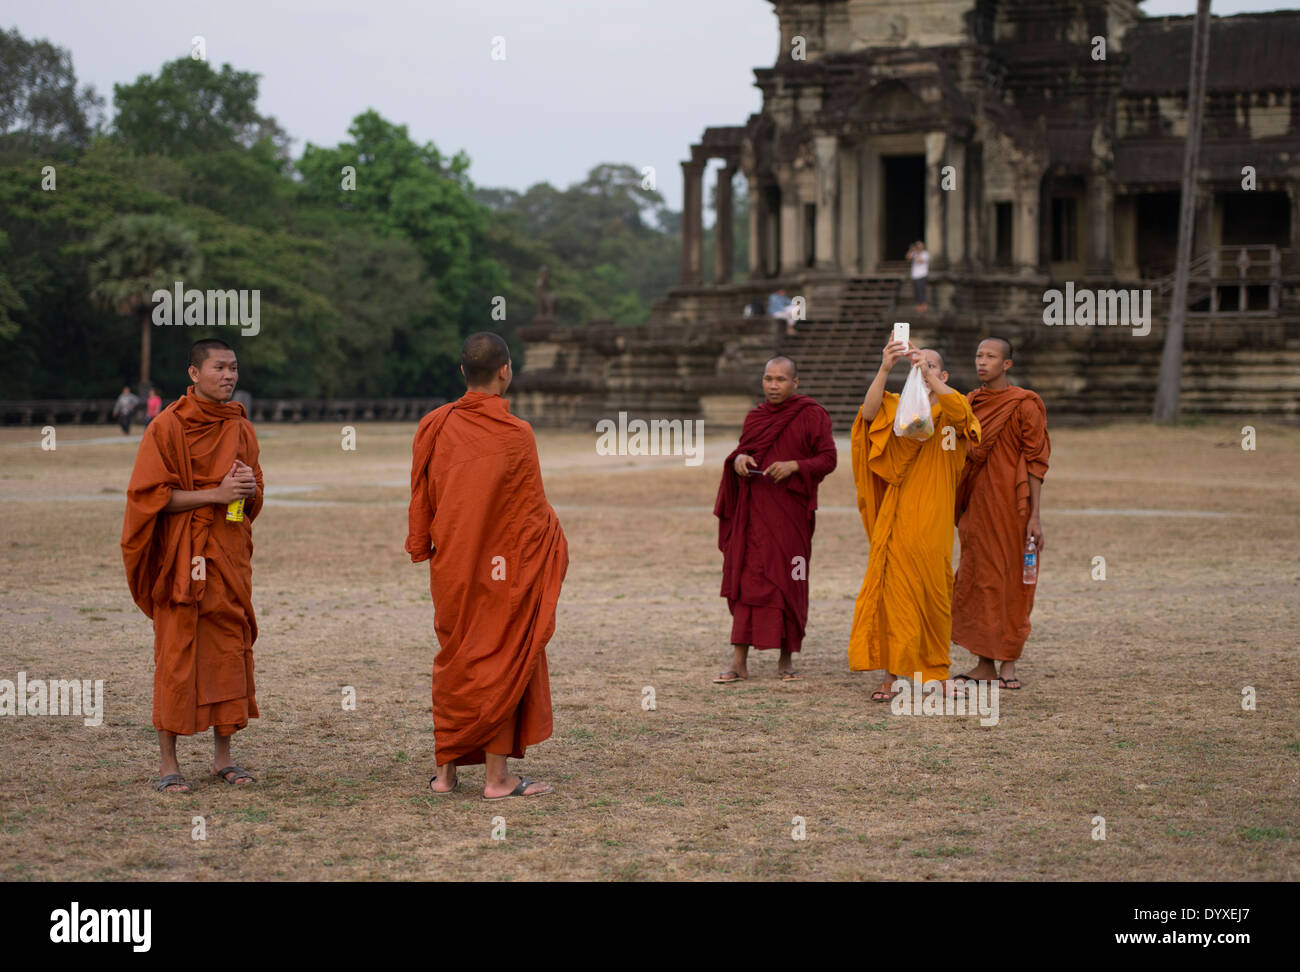 Buddhist monks in traditional robes taking photos at Angkor Wat, Siem Reap, Cambodia Stock Photo